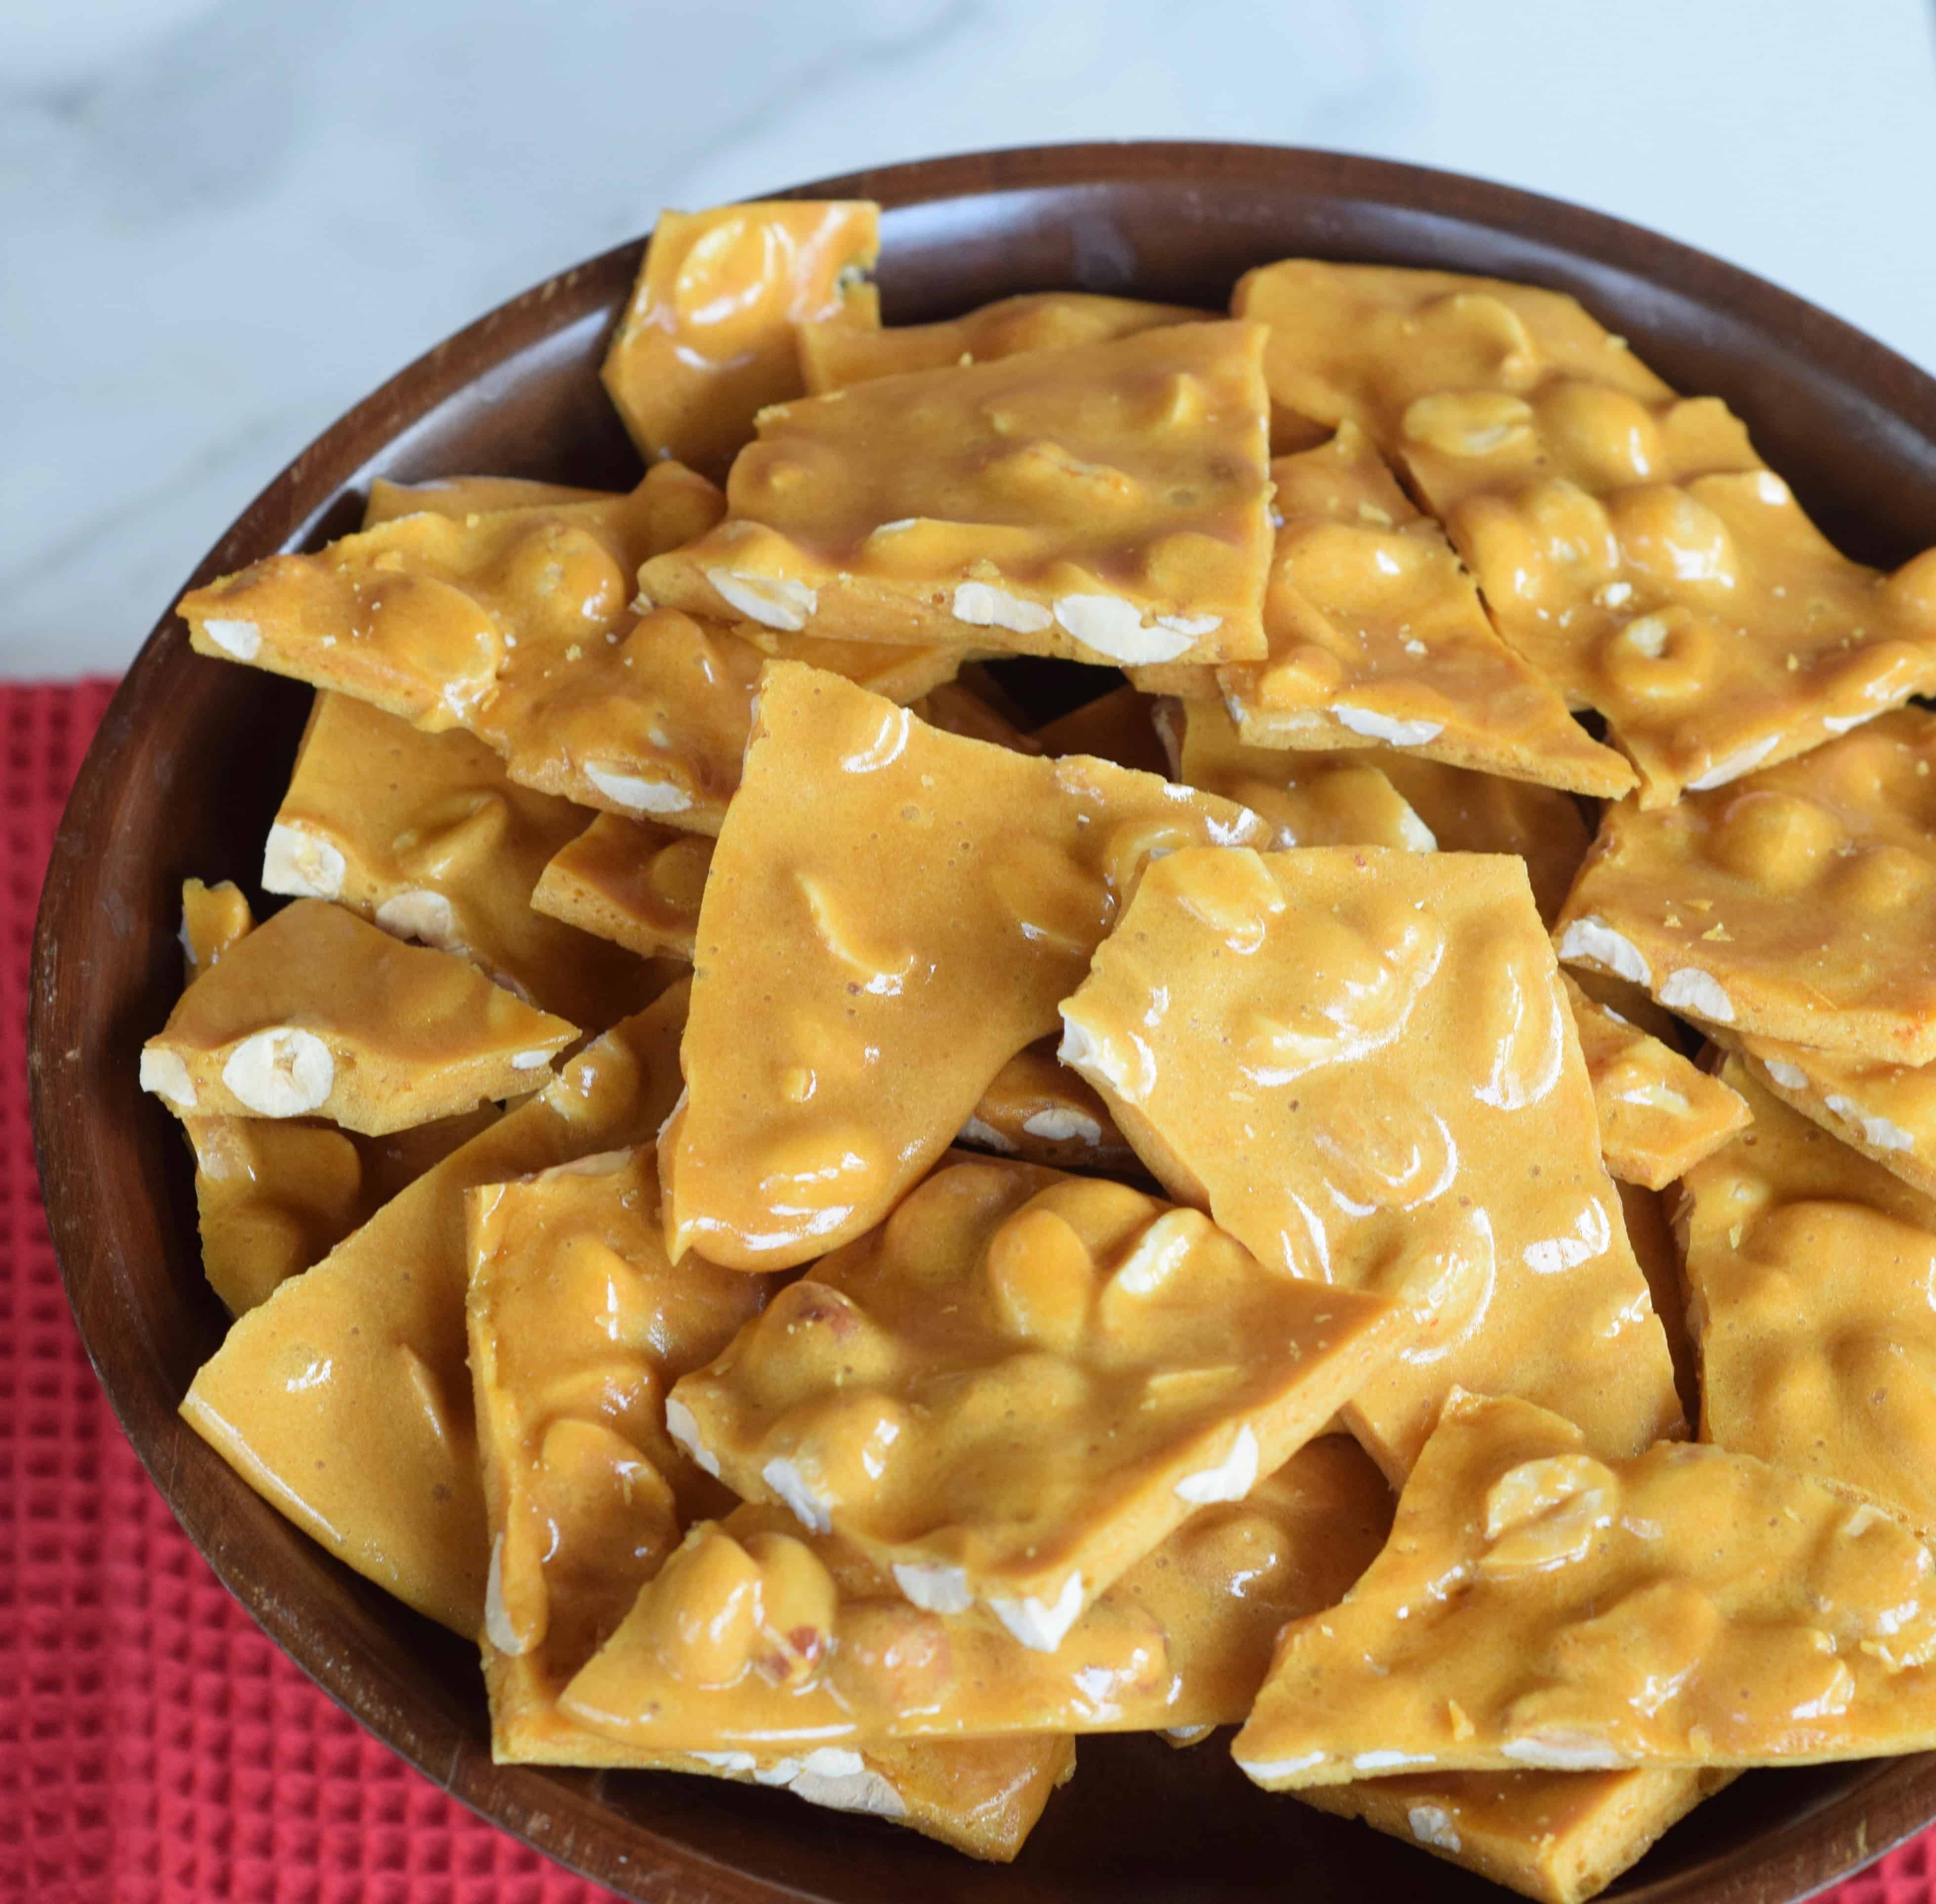 Easy Peanut Brittle made in the microwave